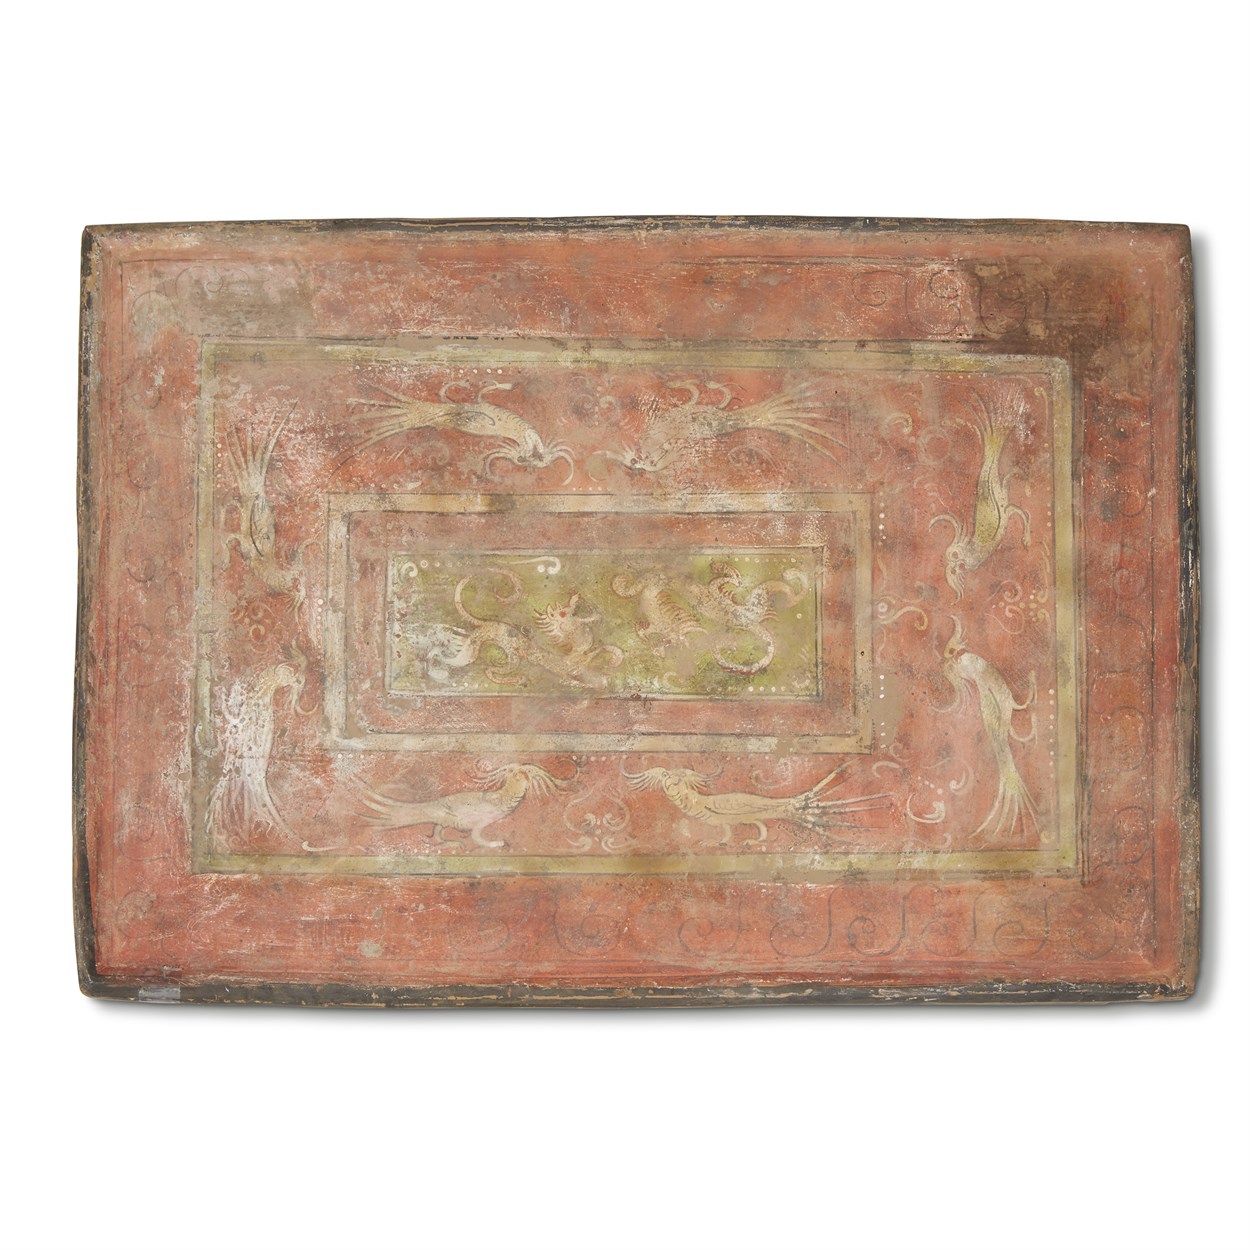 Lot 5 - An unusual Chinese painted pottery rectangular plaque